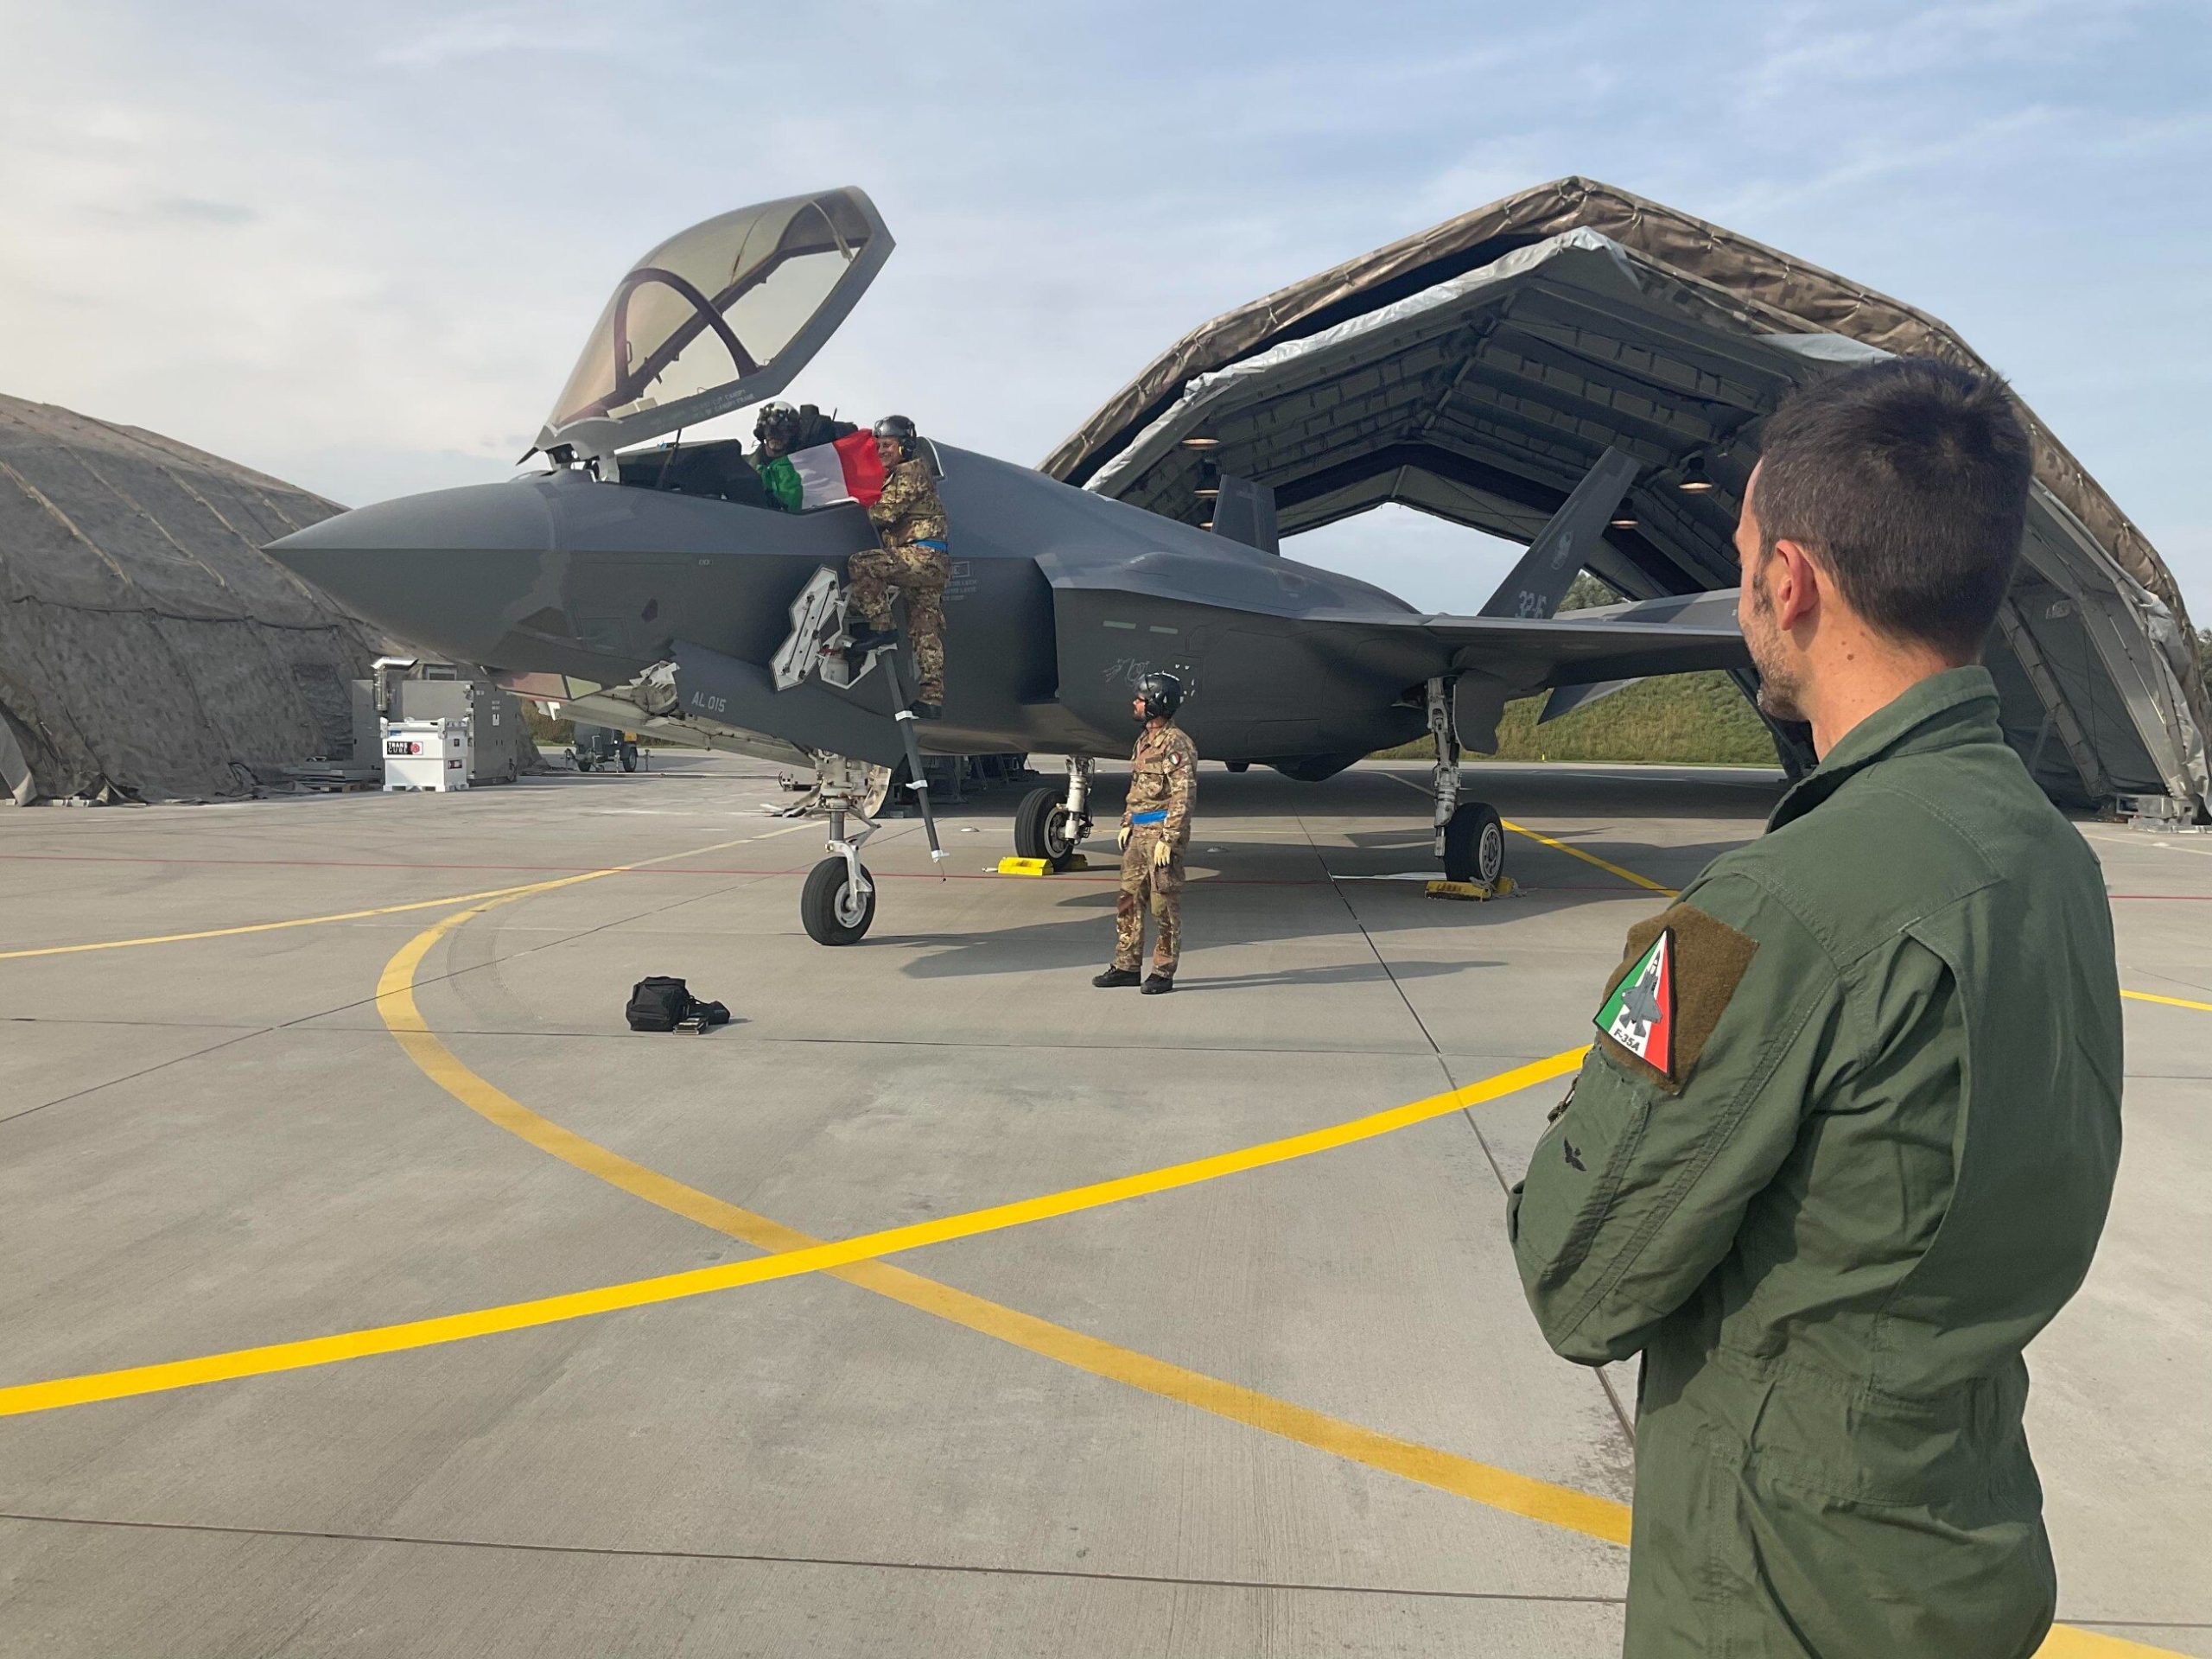 Italian F-35A fighters already in Poland.  They will patrol our skies